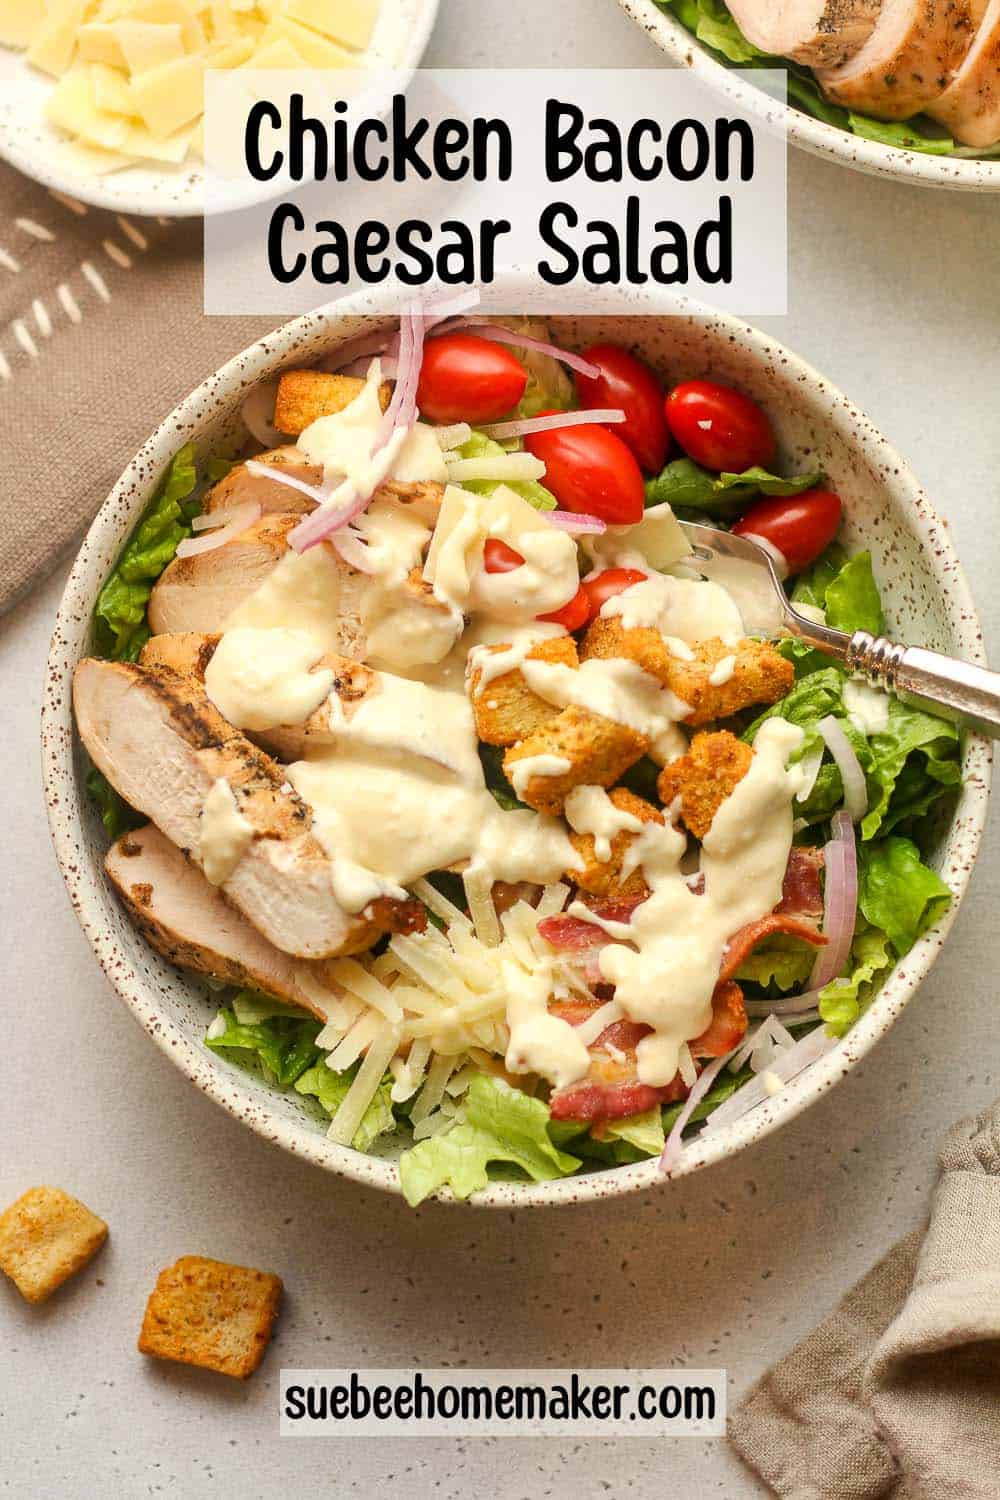 A chicken bacon caesar salad with caesar dressing on top.